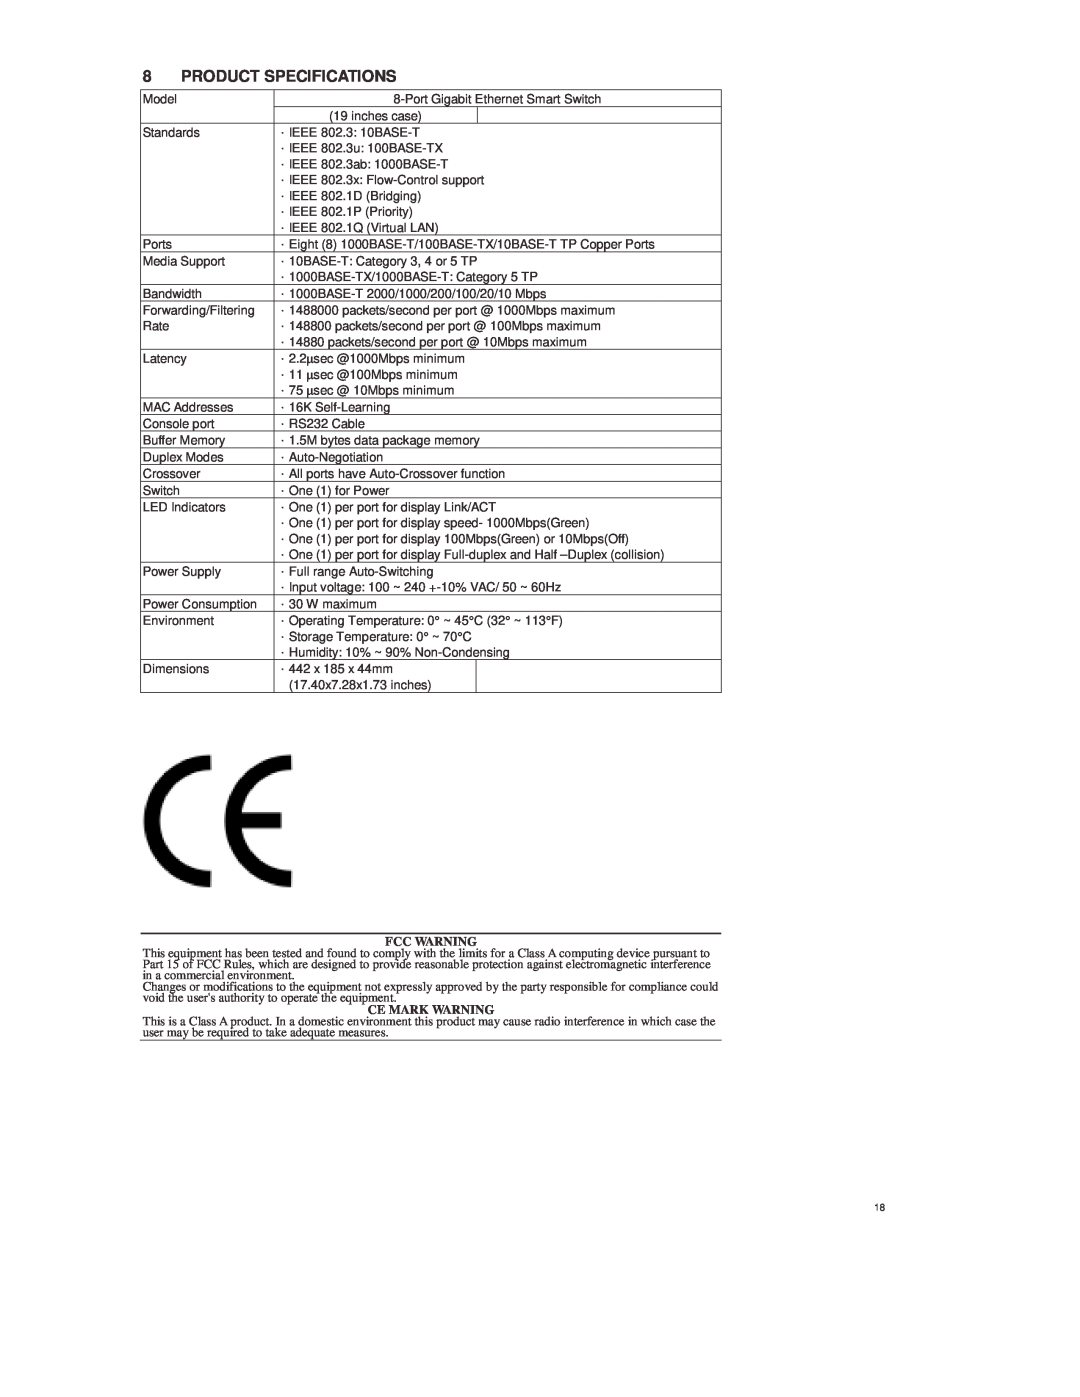 Lindy 25008 manual Product Specifications, Fcc Warning, Ce Mark Warning 